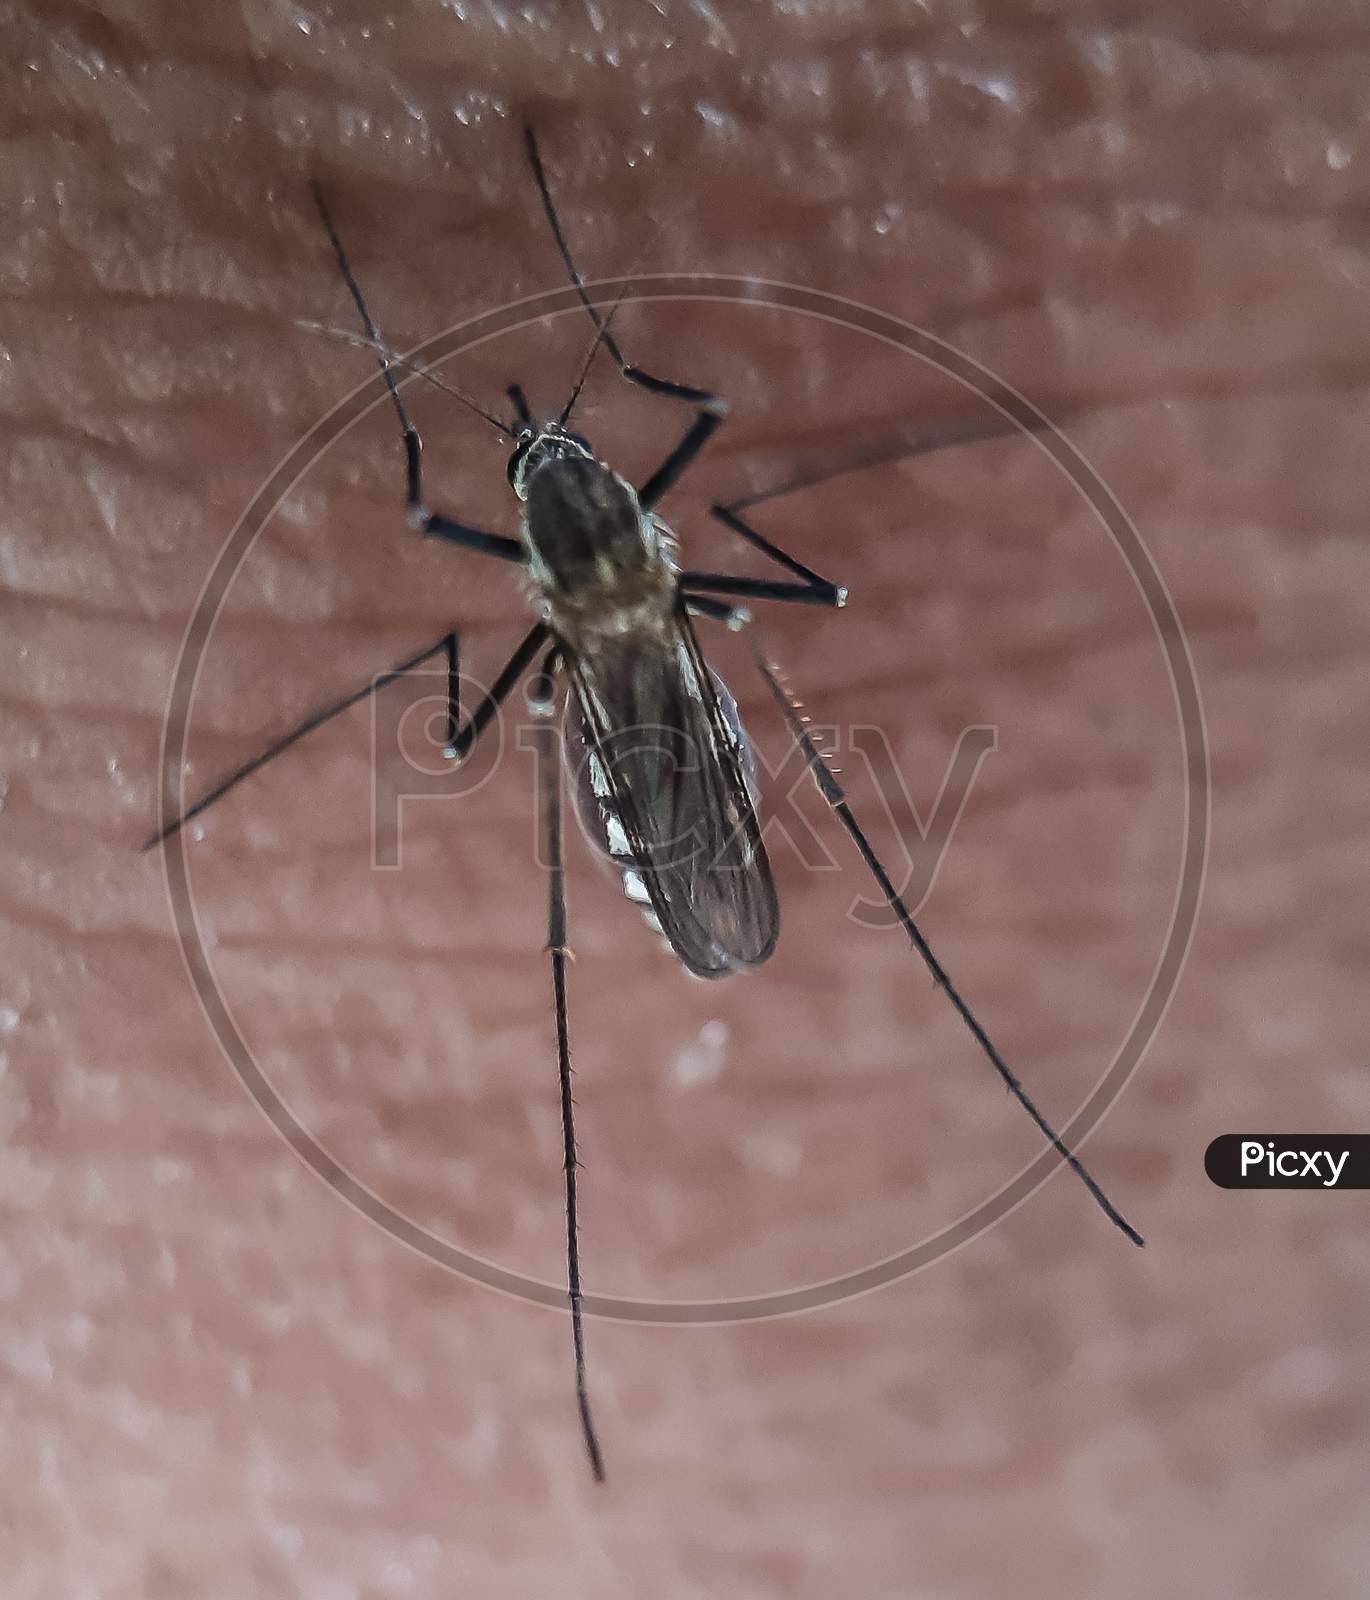 Mosquitoes Are Parasitic Animals, So Mosquitoes Depend On Others To Survive.